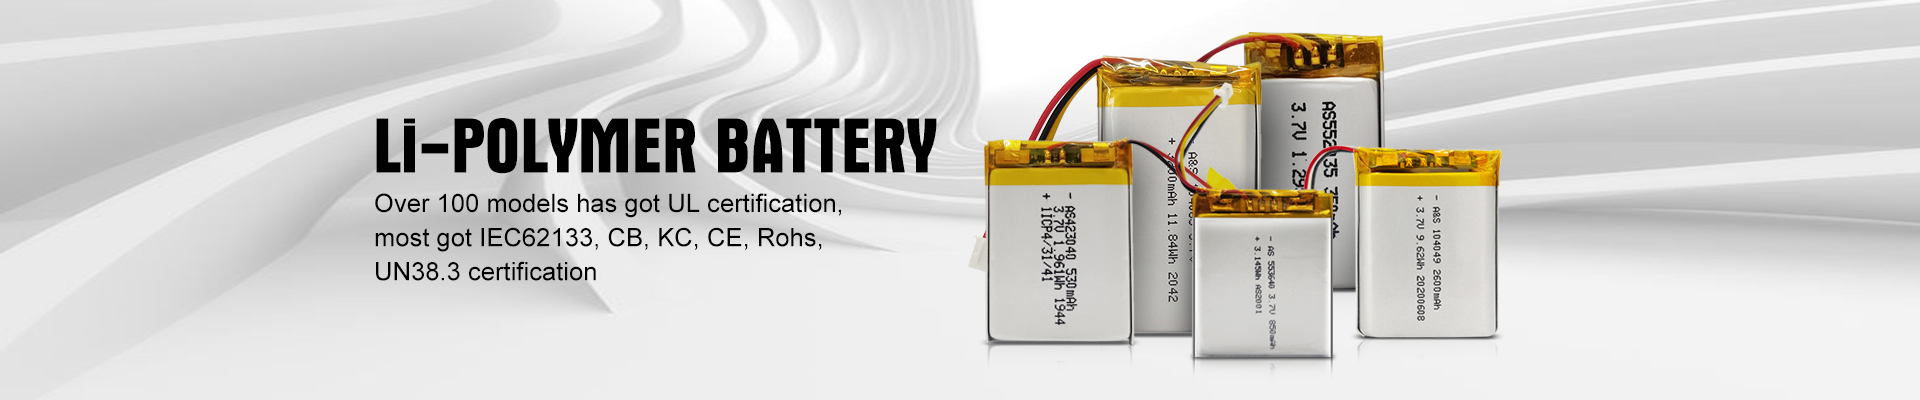 polymer lithium-ion batteries